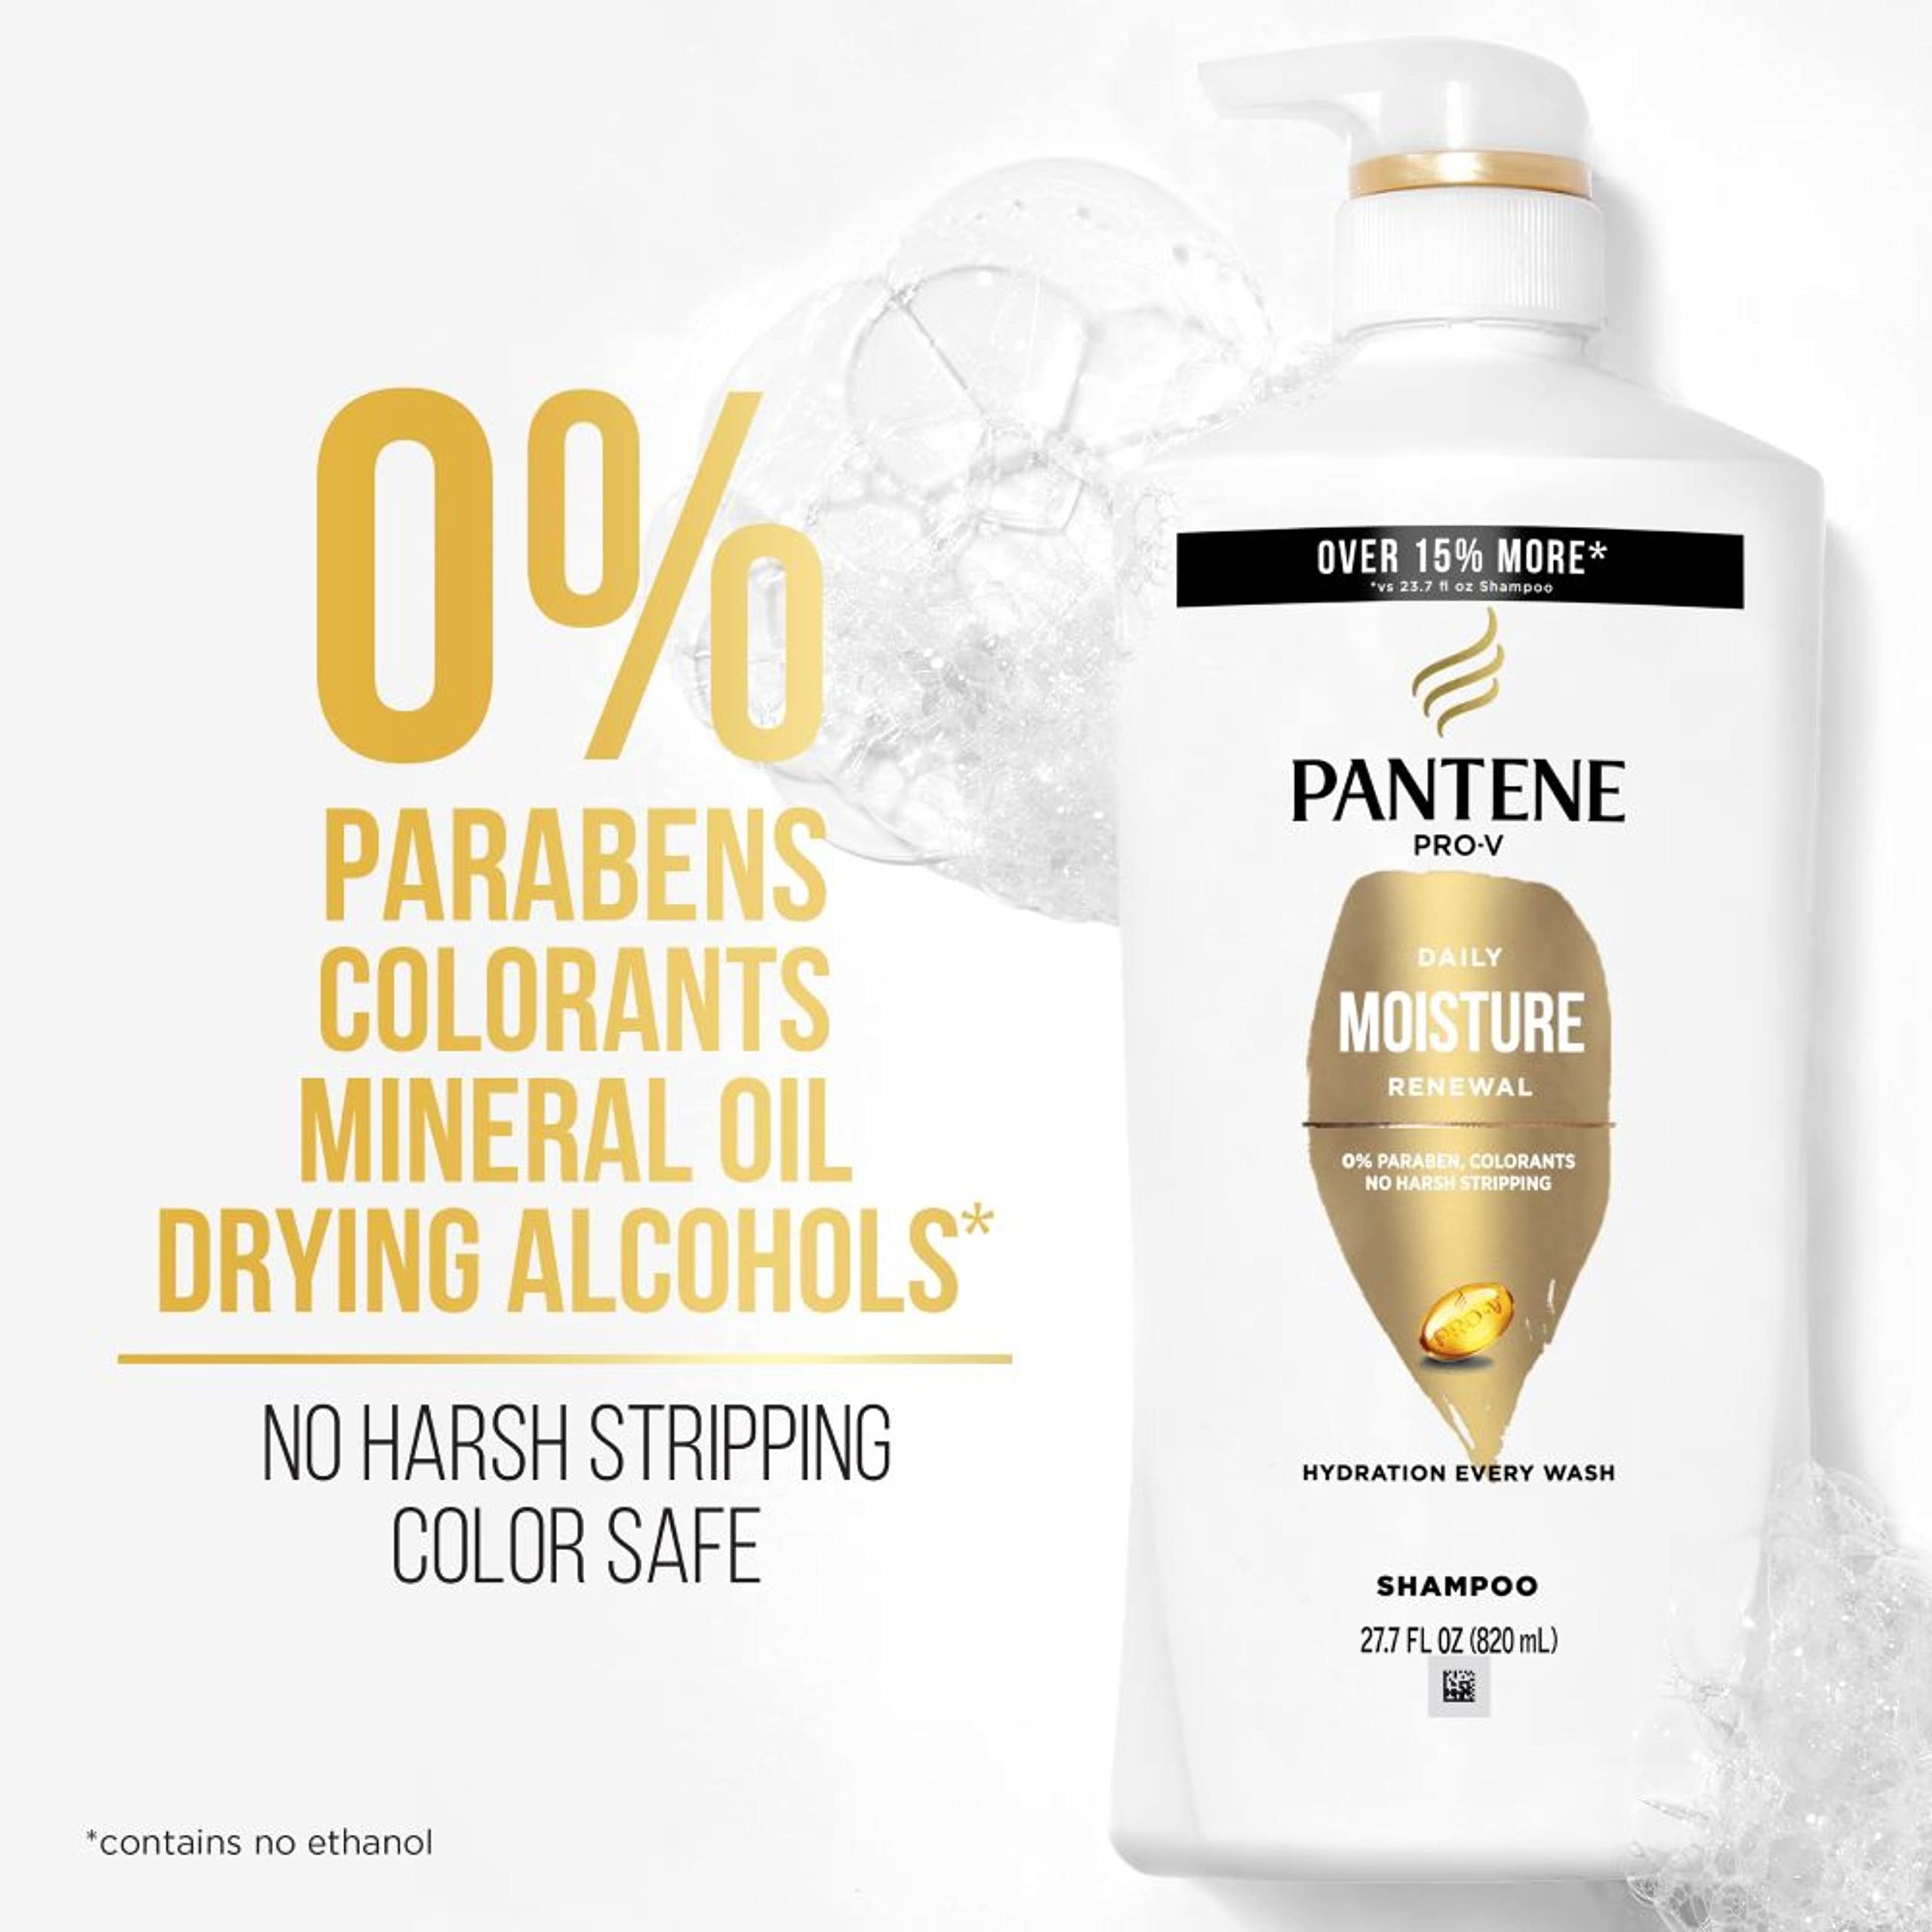 Pantene Shampoo Twin Pack with Hair Treament, Daily Moisture Renewal for Dry Hair, Safe for Color-Treated Hair